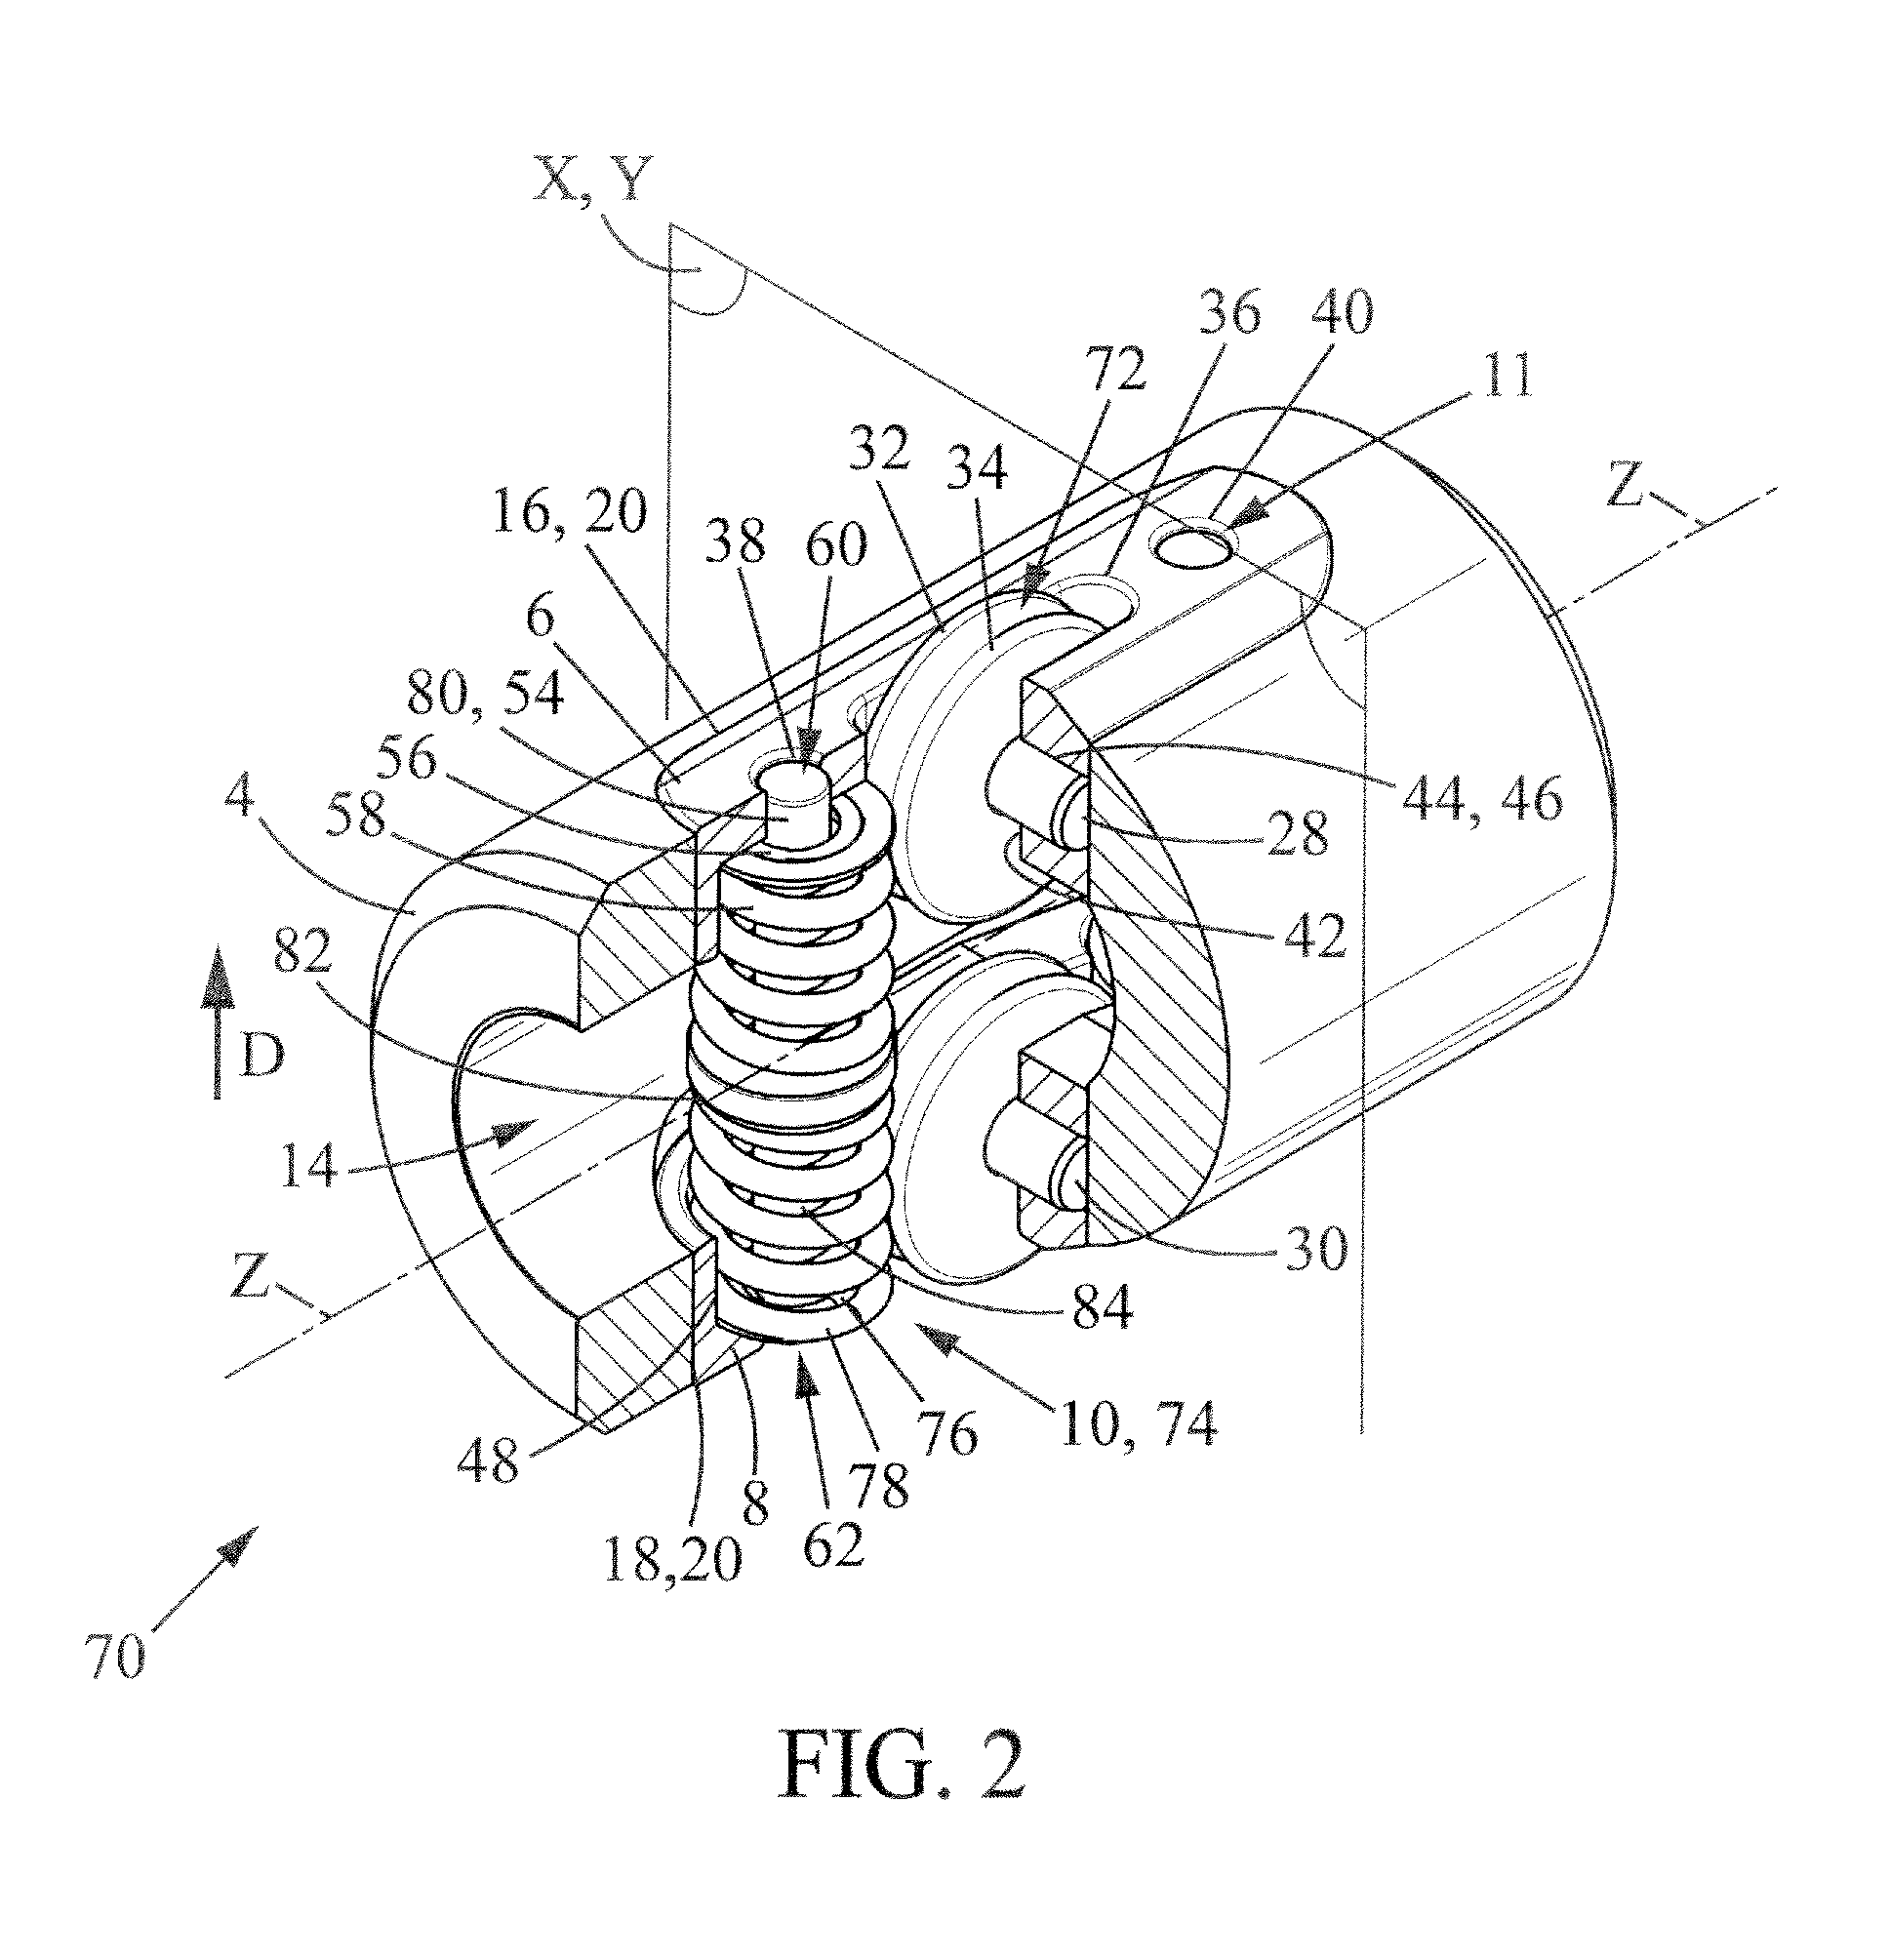 Torque anchor for blocking the rotation of a production string of a well